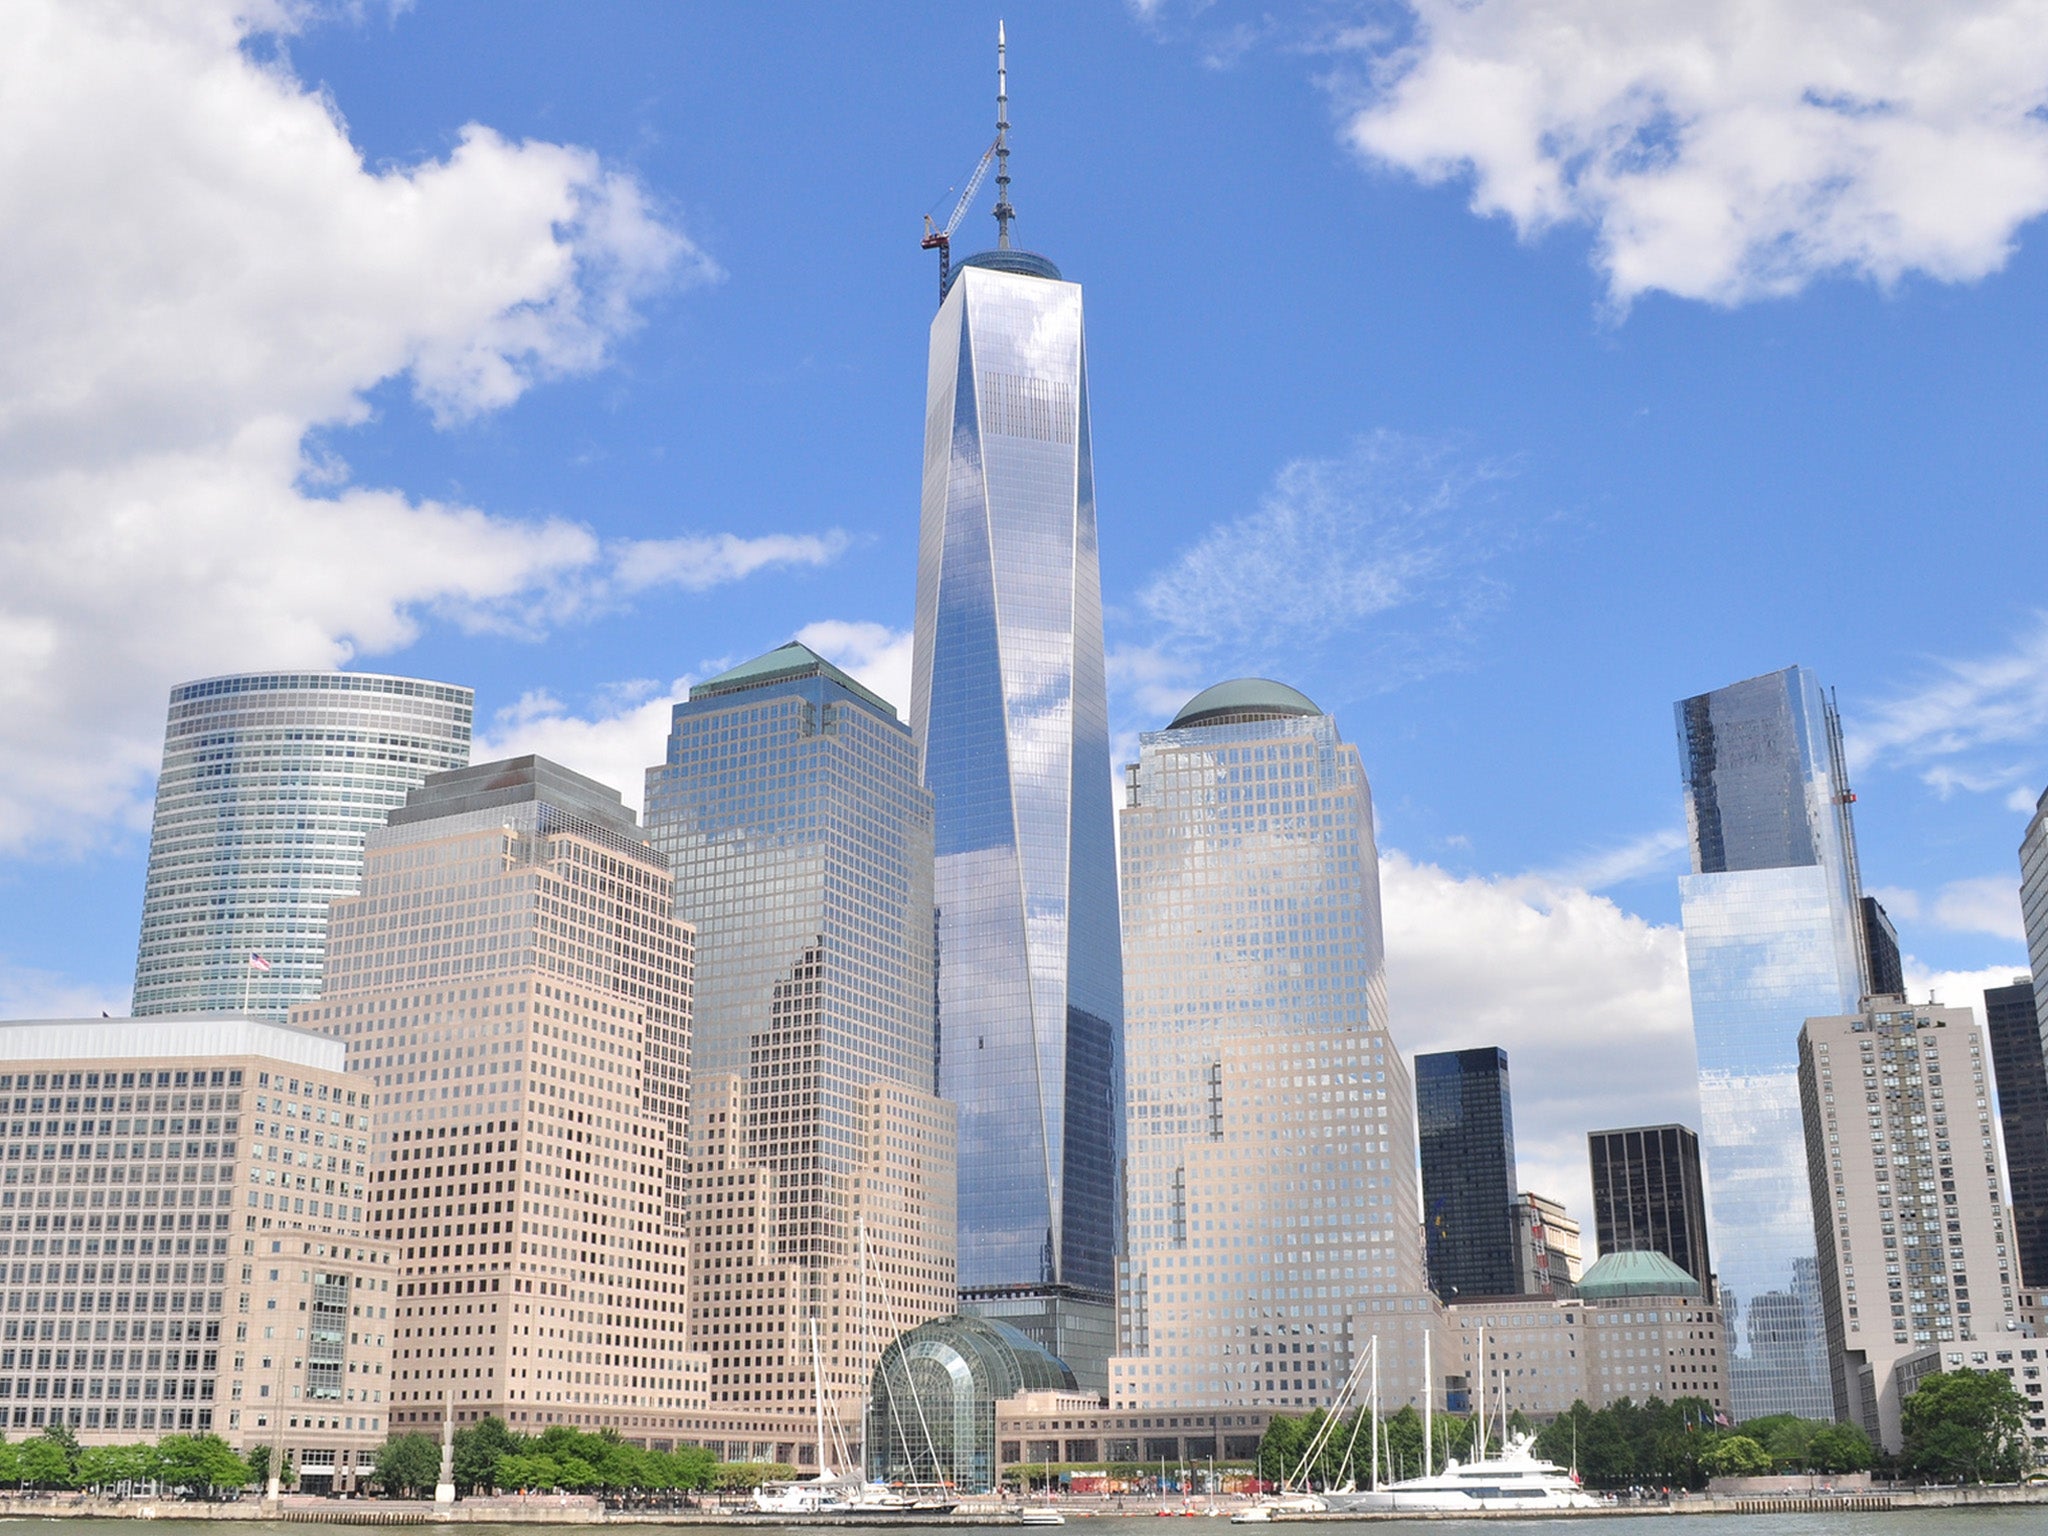 The One World Trade Center is set to open later this year